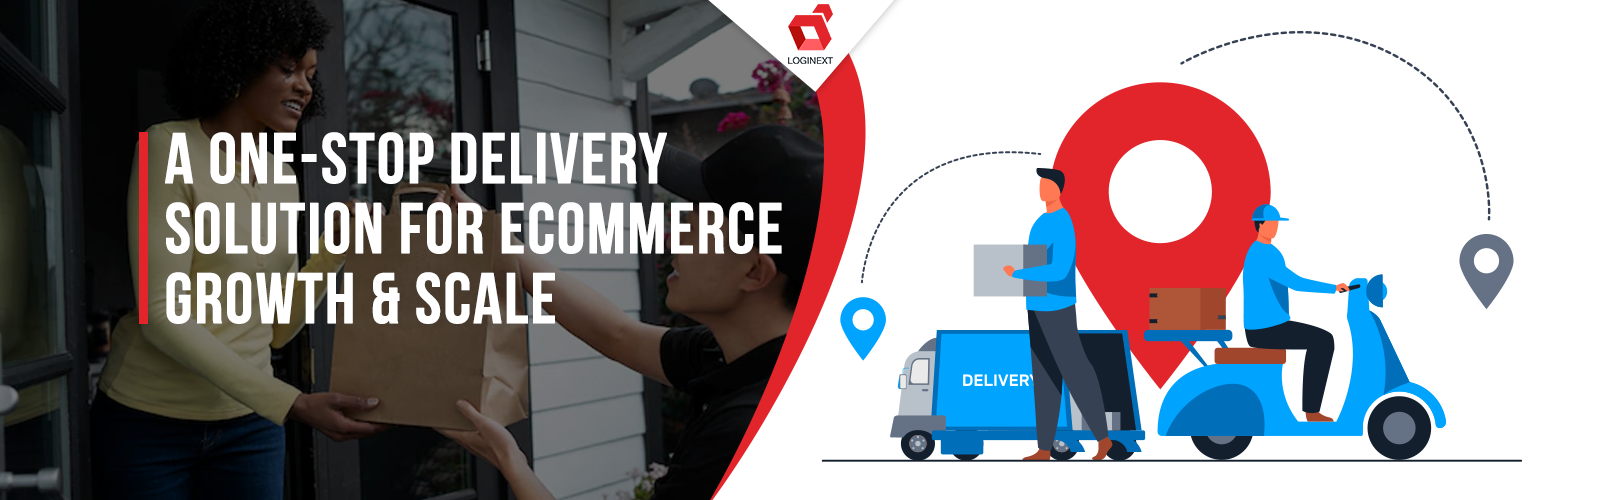 A One-Stop Delivery Solution For eCommerce Growth